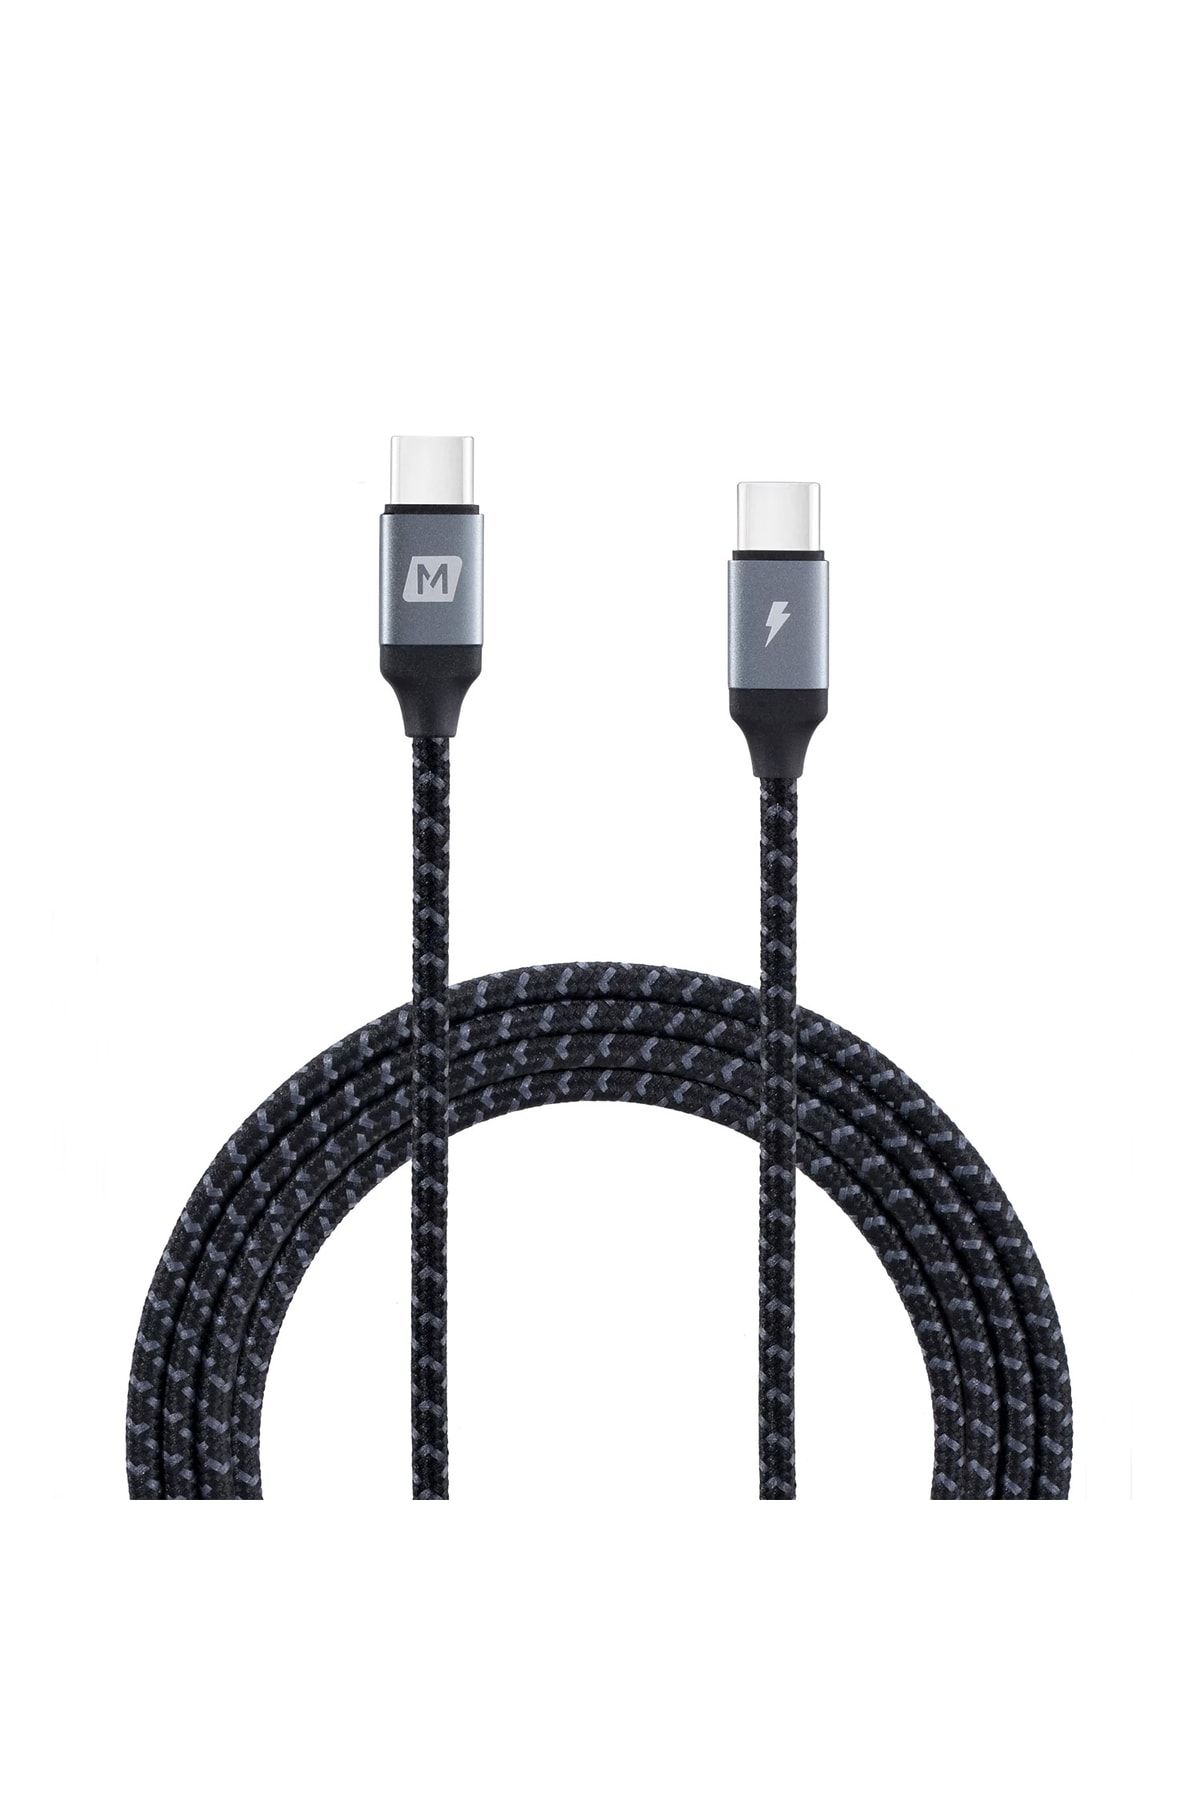 Momax Zero Usb-c To Usb-c Cable (2m) Support 60w Pd